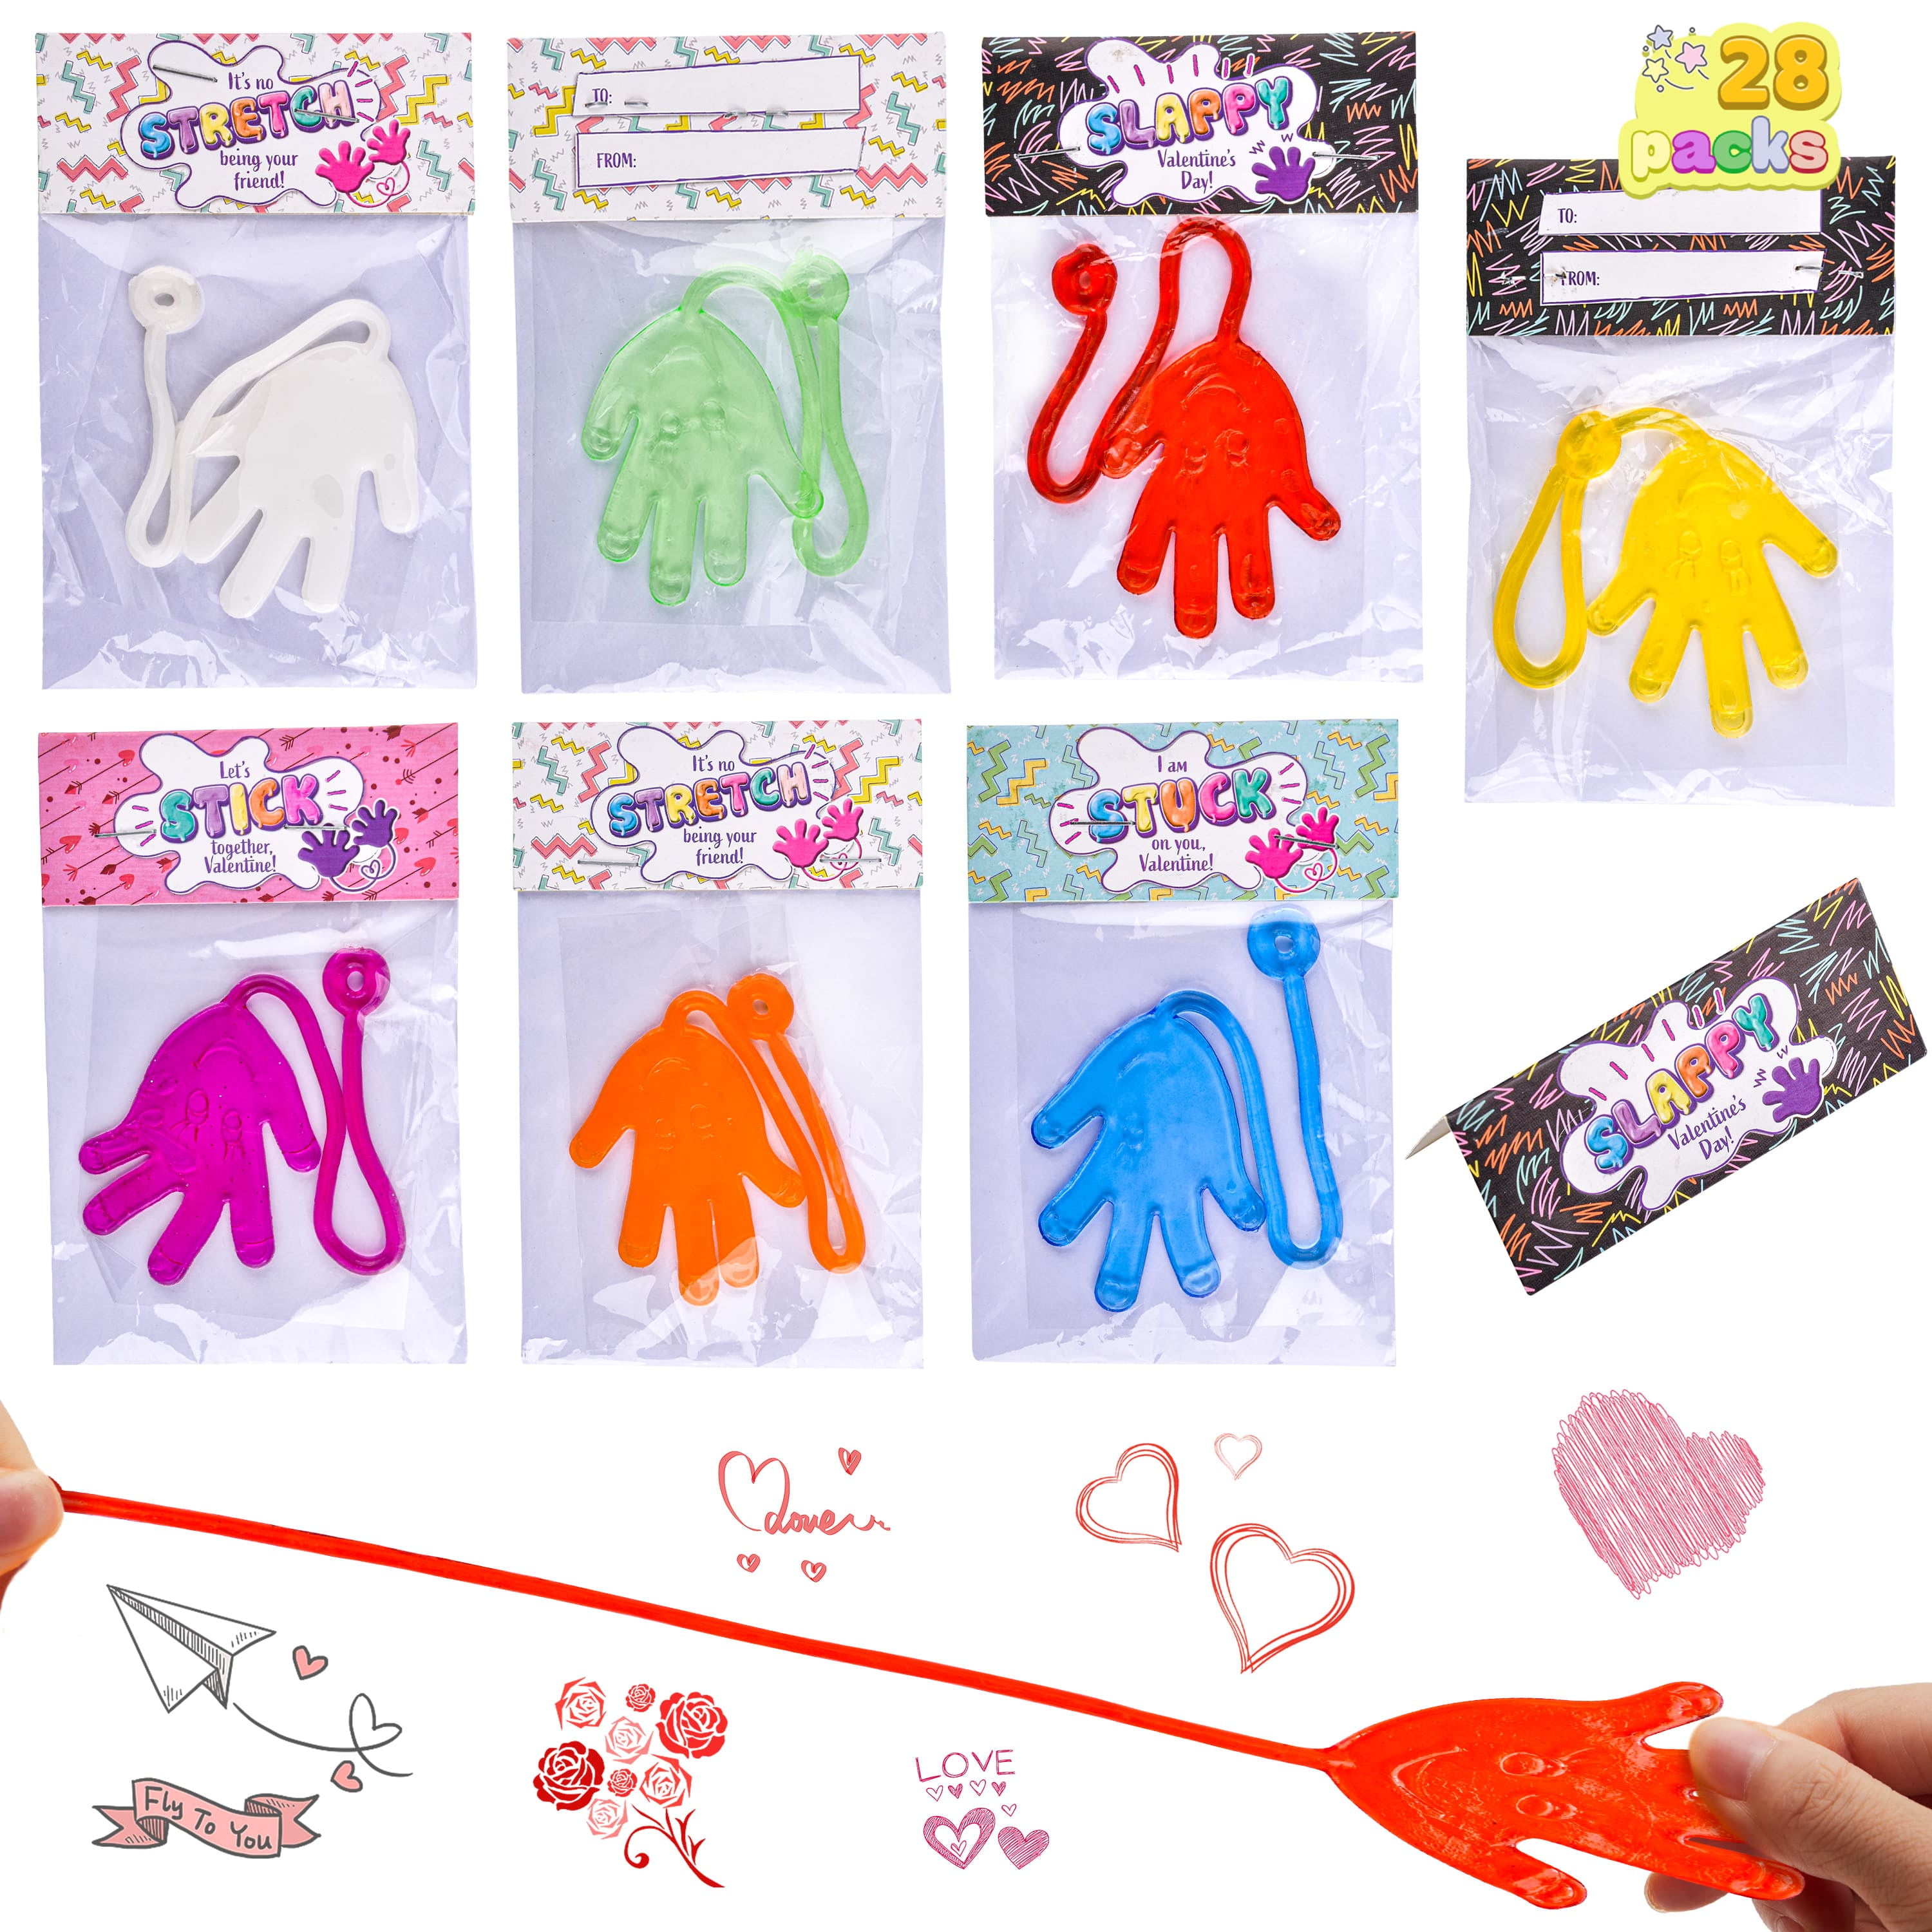  30 Pack Valentines Day Gifts For Kids School Party Favors  Kids Valentines Cards For Kids Classroom Exchange Bulk Toys Its Mini Toy  Goodie Bags Stuffers Heart Pop Fidget Keychain For